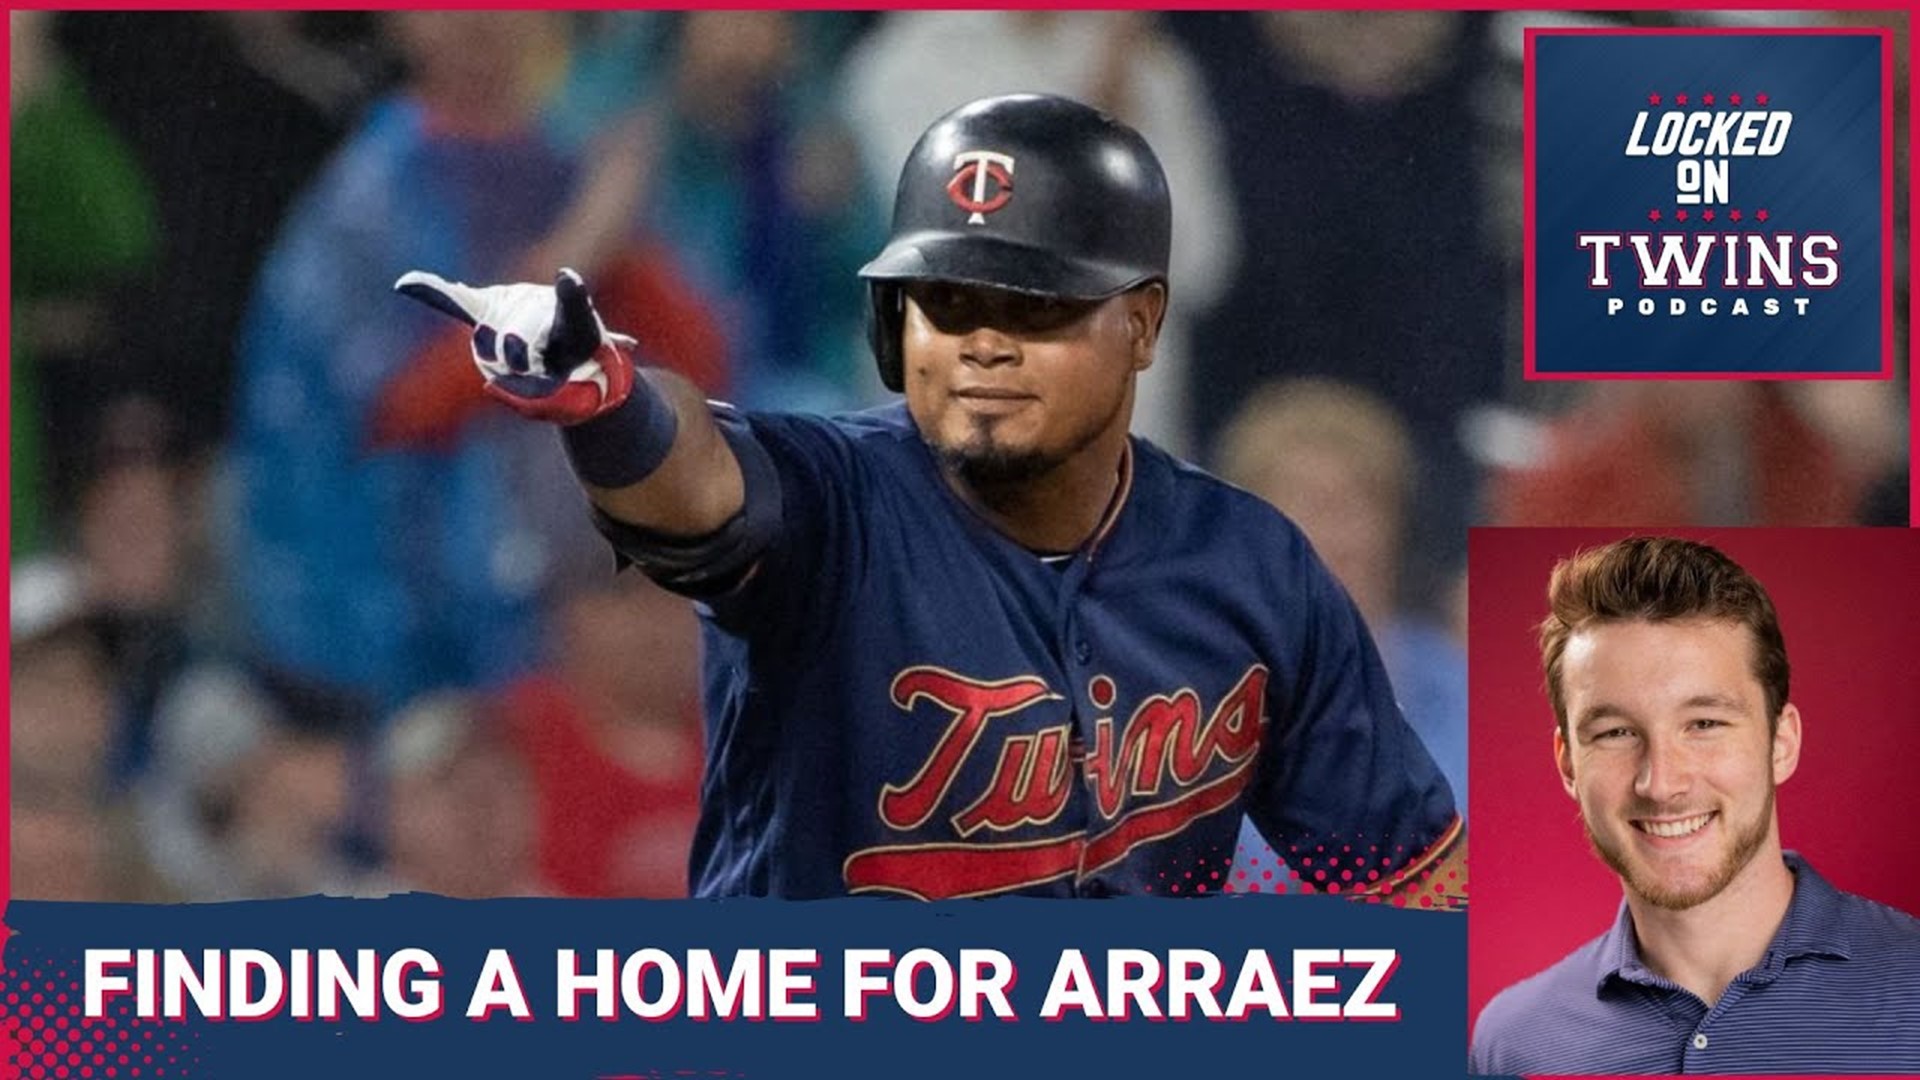 Luis Arraez, the 2022 American League batting champion, made a defensive shift early in the season with a move to first base.